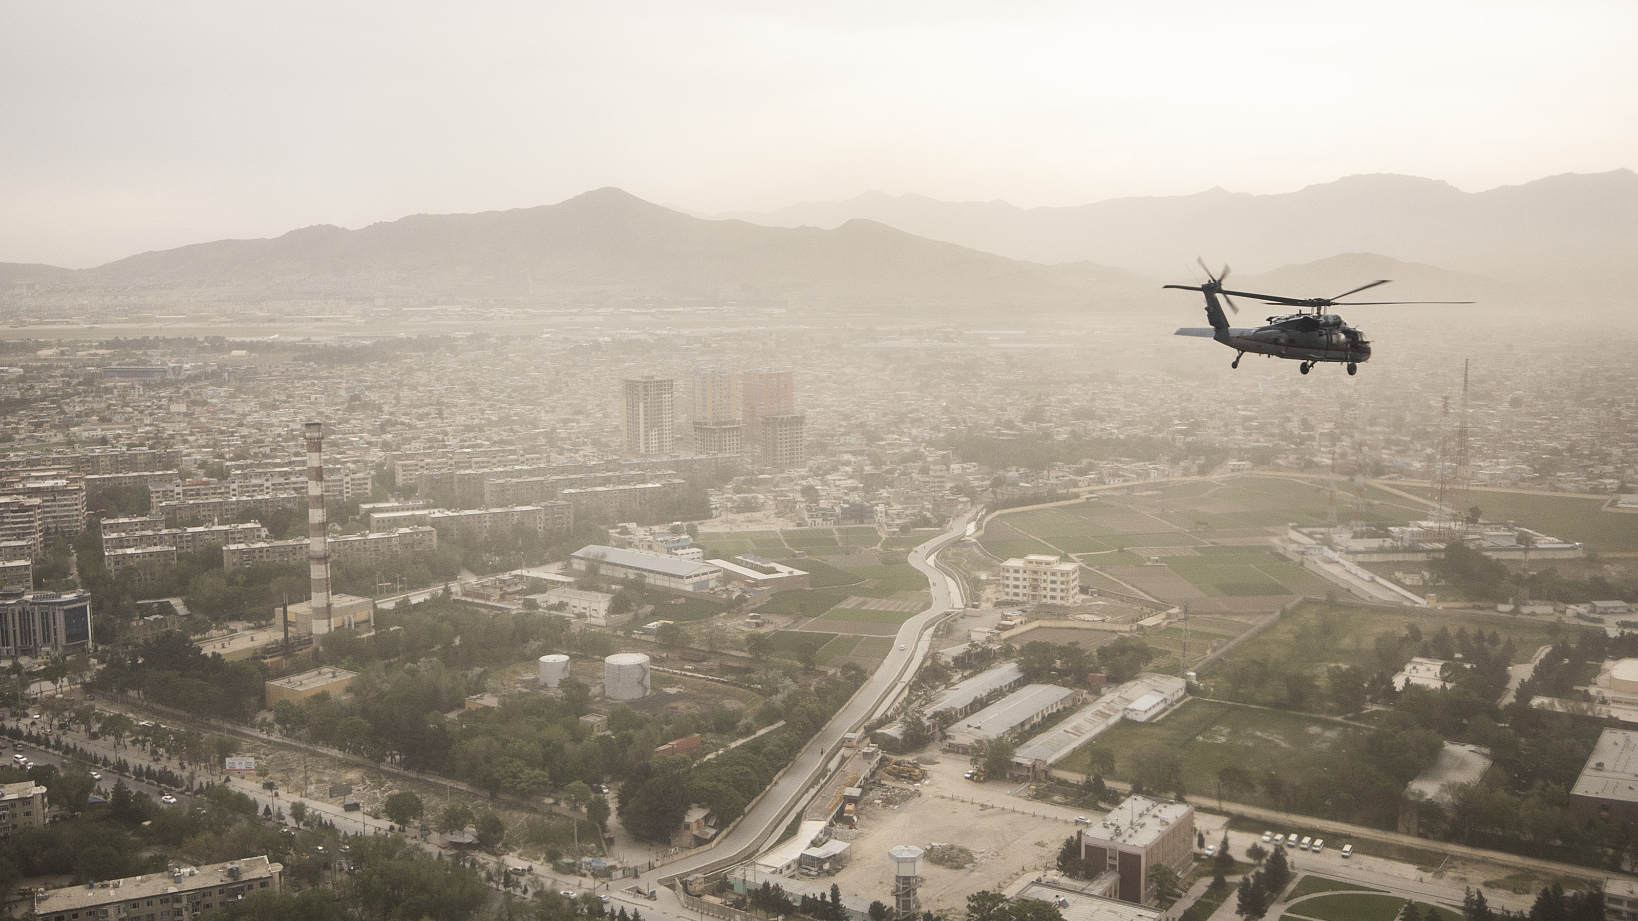 A Black Hawk helicopter of the U.S. Air Force is pictured in front of the cityscape in Kabul, Afghanistan, April 29, 2021. /Getty